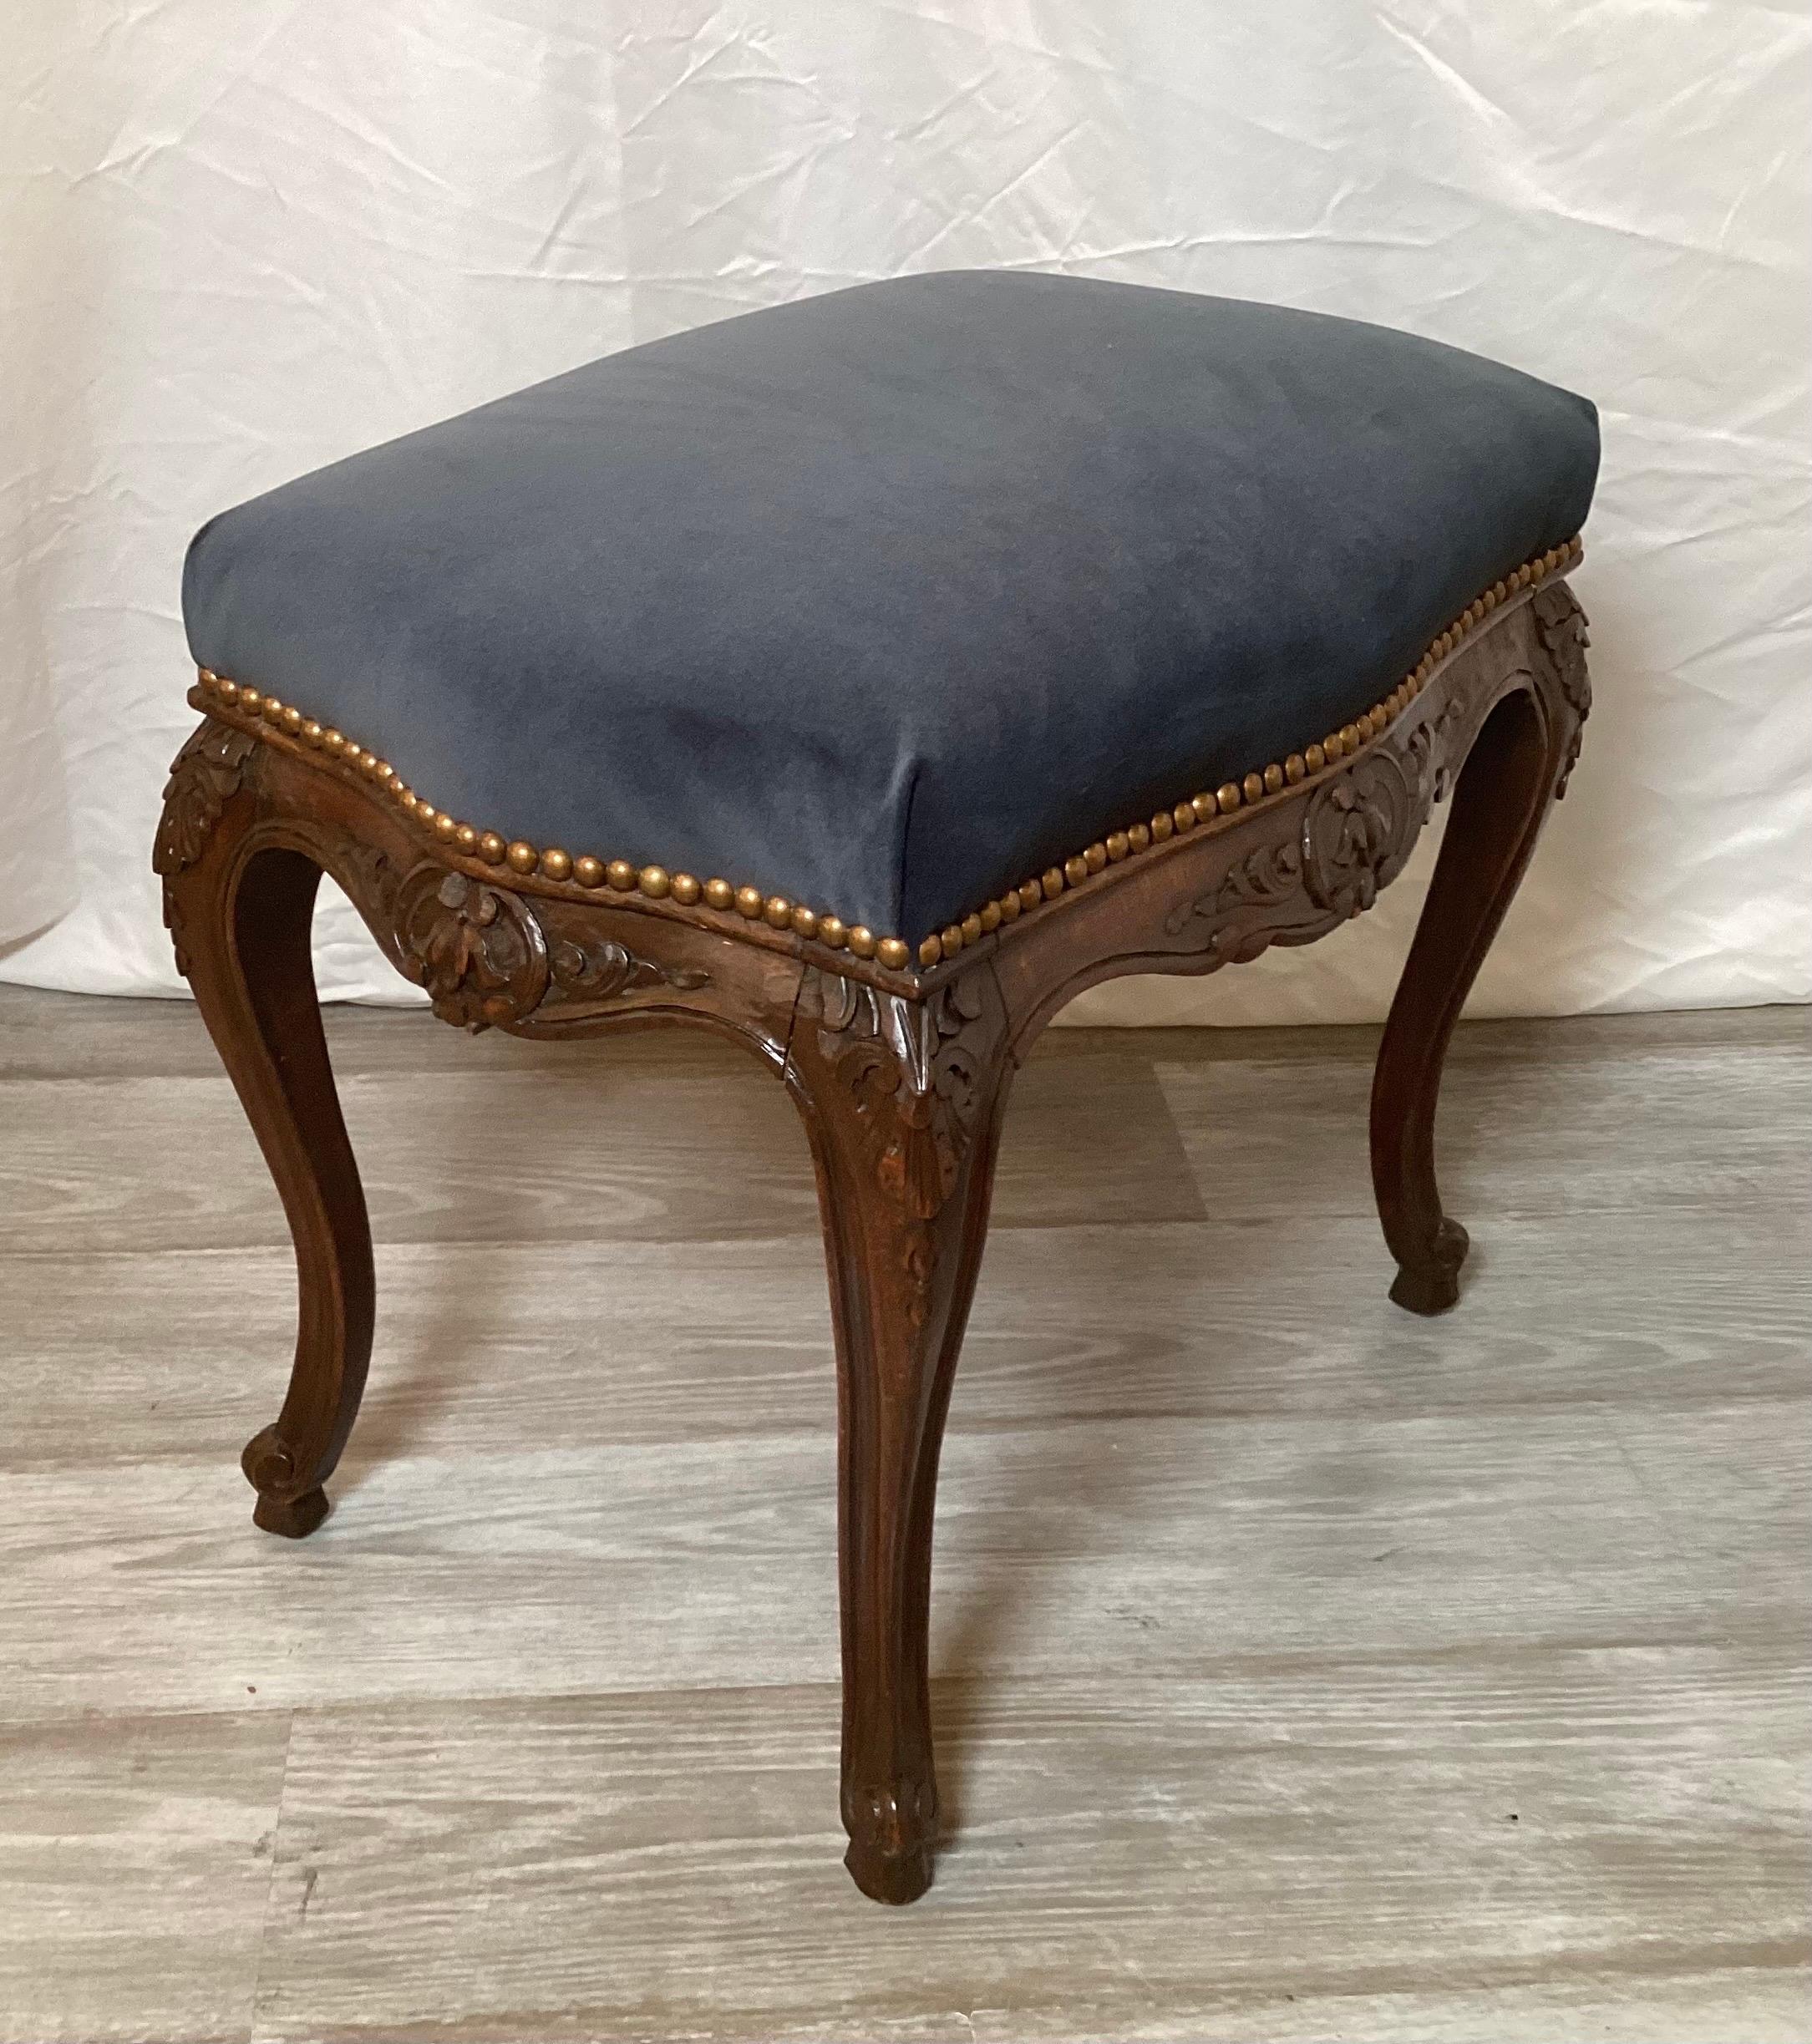 Classic hand carved walnut louis XV style dark gray blue velvet bench with nail head trim. The wood and finish in excellent condition with new fabric.